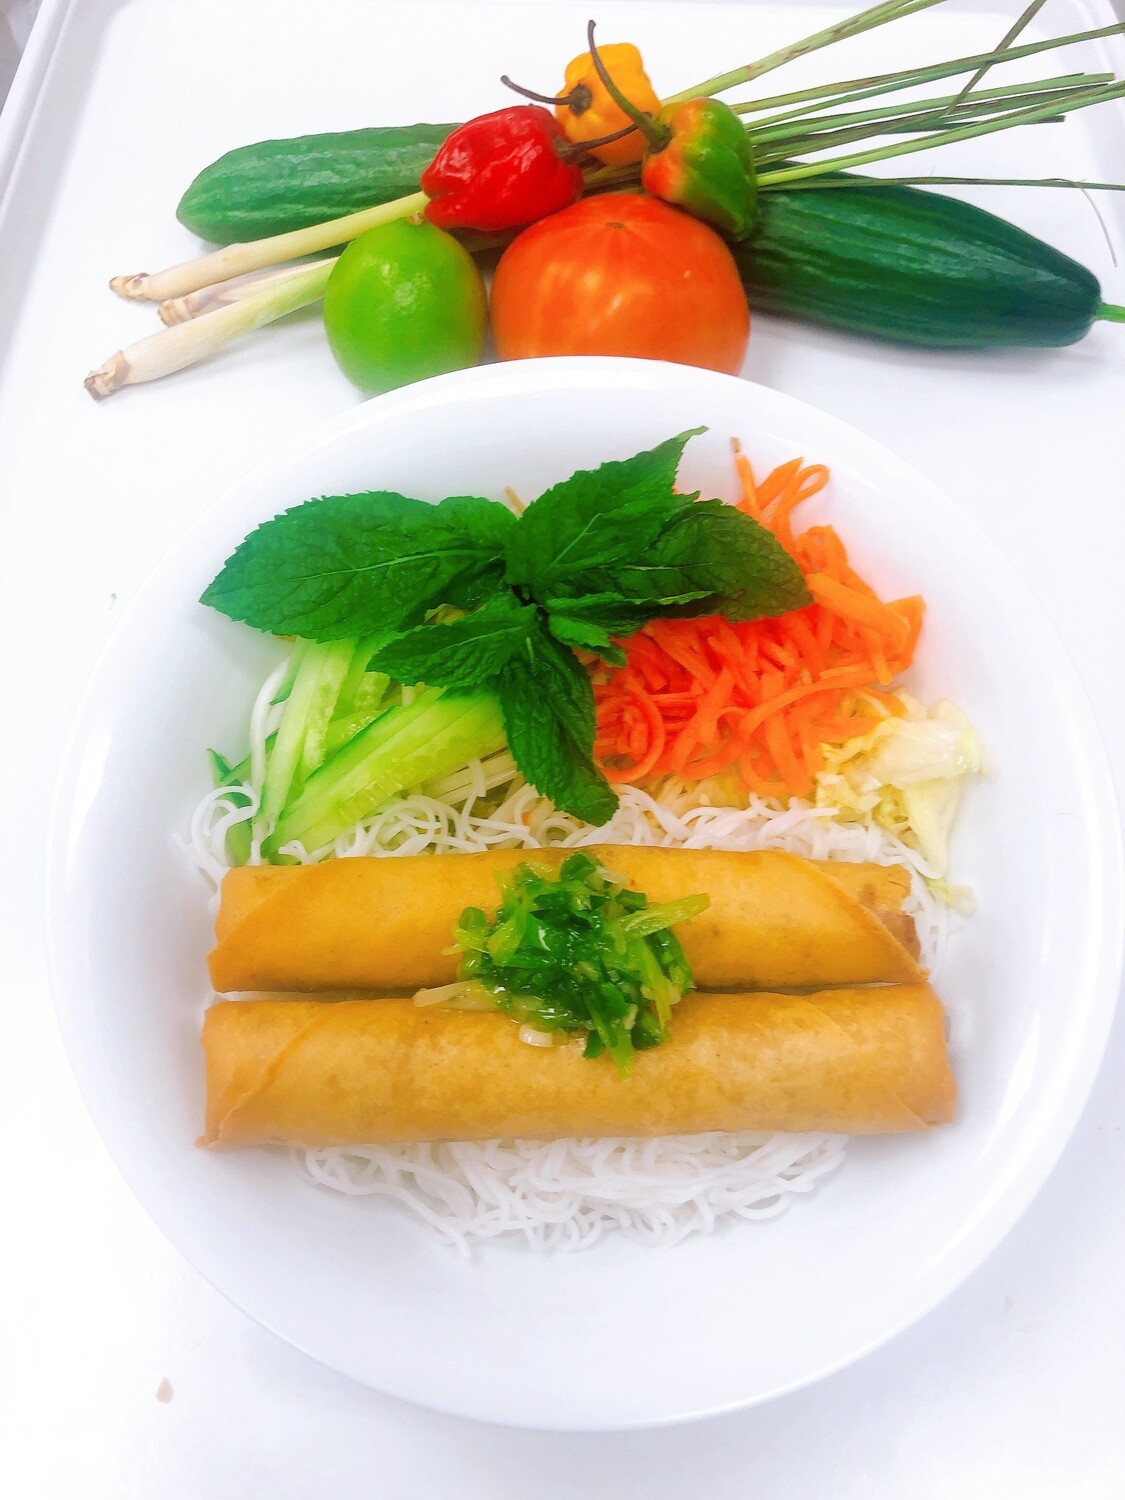 411- Vermicelli with Spring Rolls (2 Rolls)